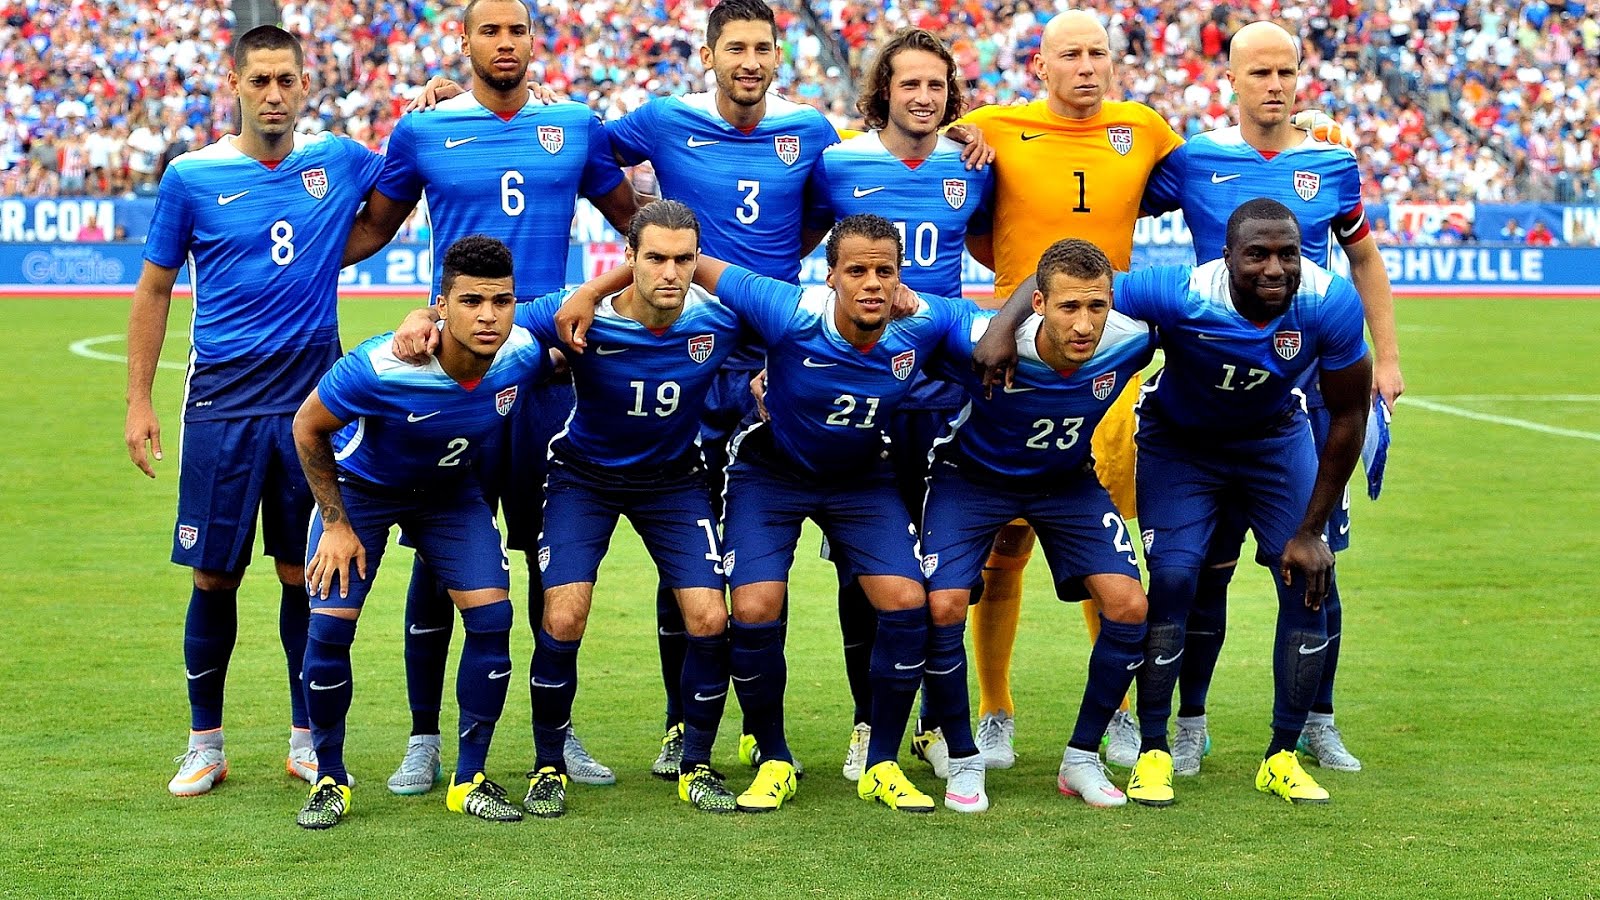 United States men's national soccer team - Team Choices